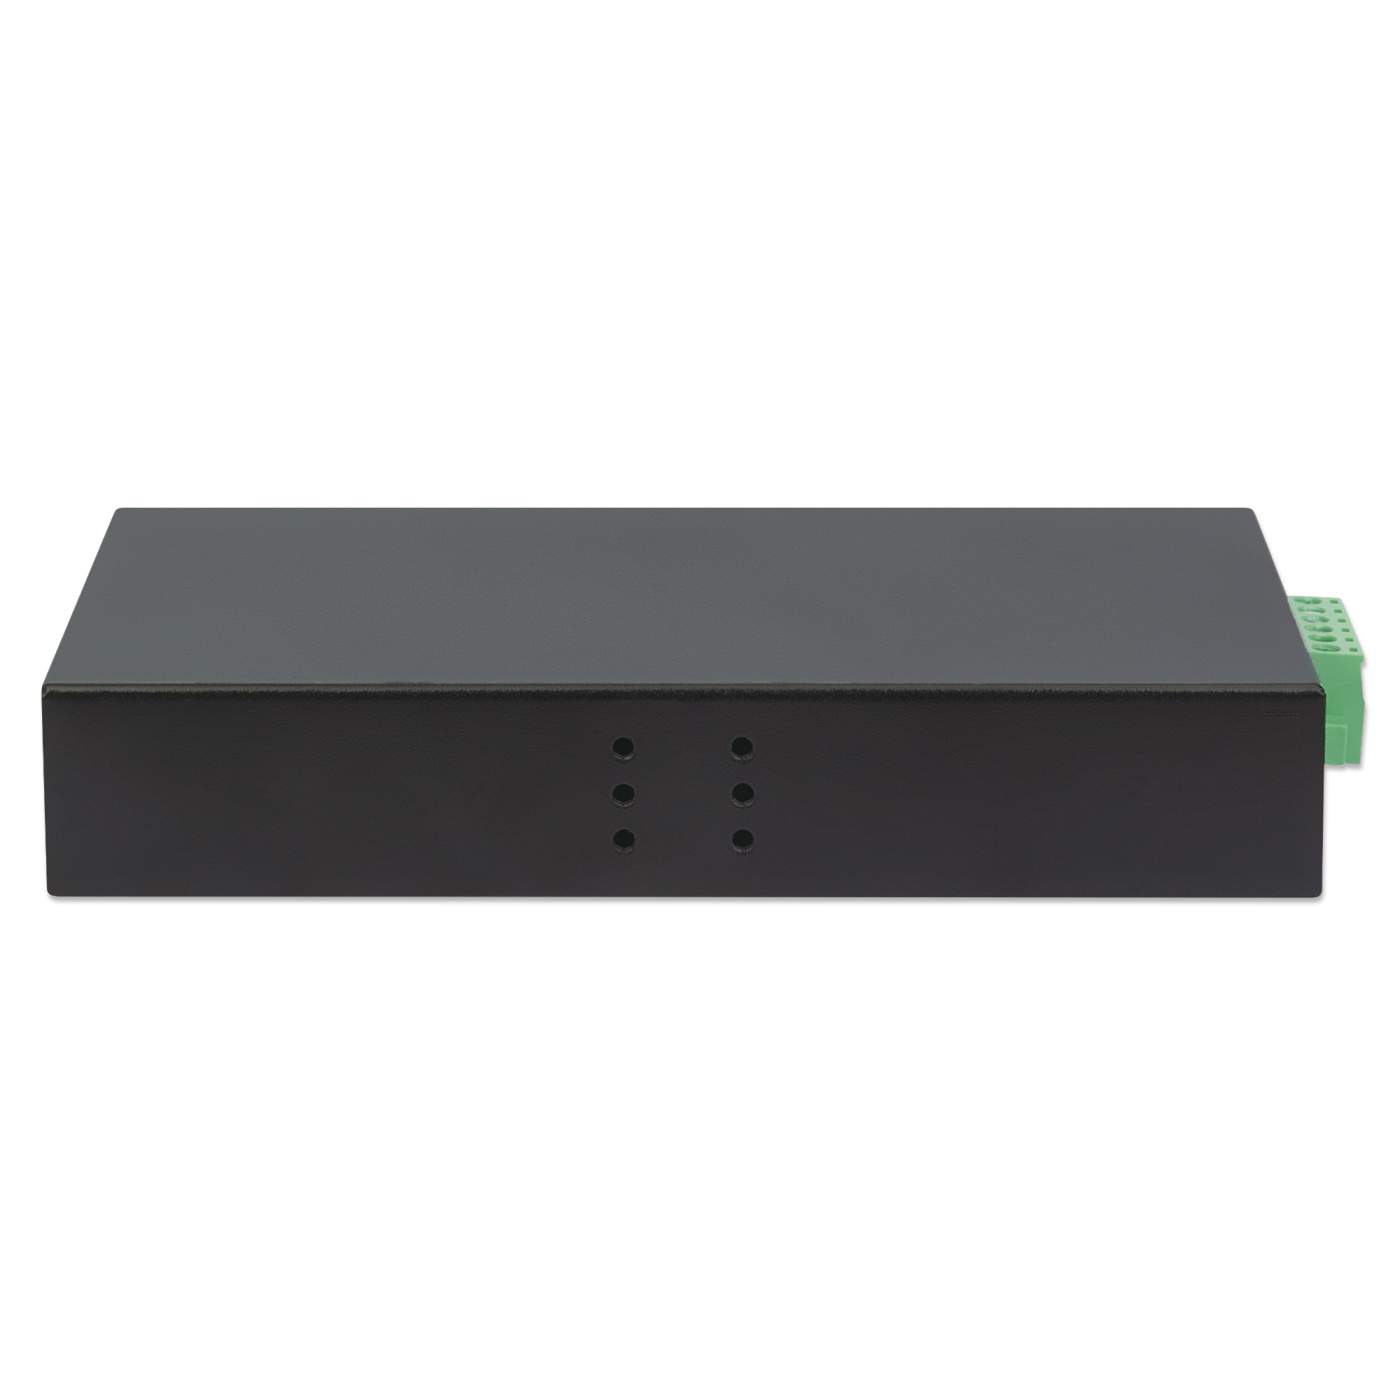 Industrial 4-Port Gigabit Ethernet Switch with 2 SFP Ports Image 5